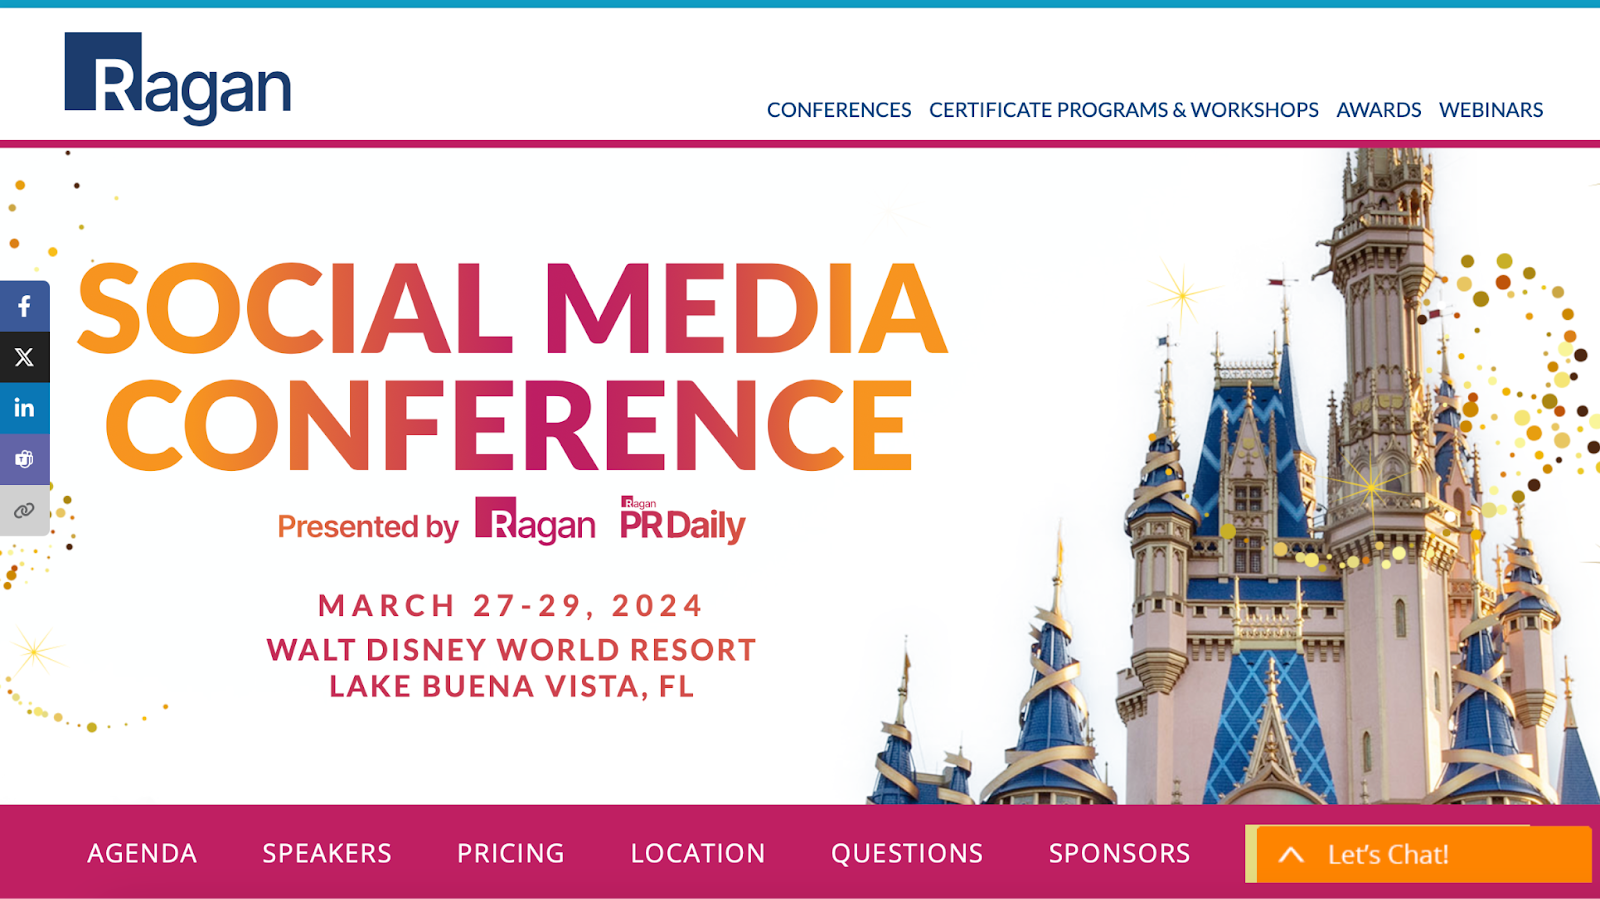 Popular Social Media Events and Courses to Know